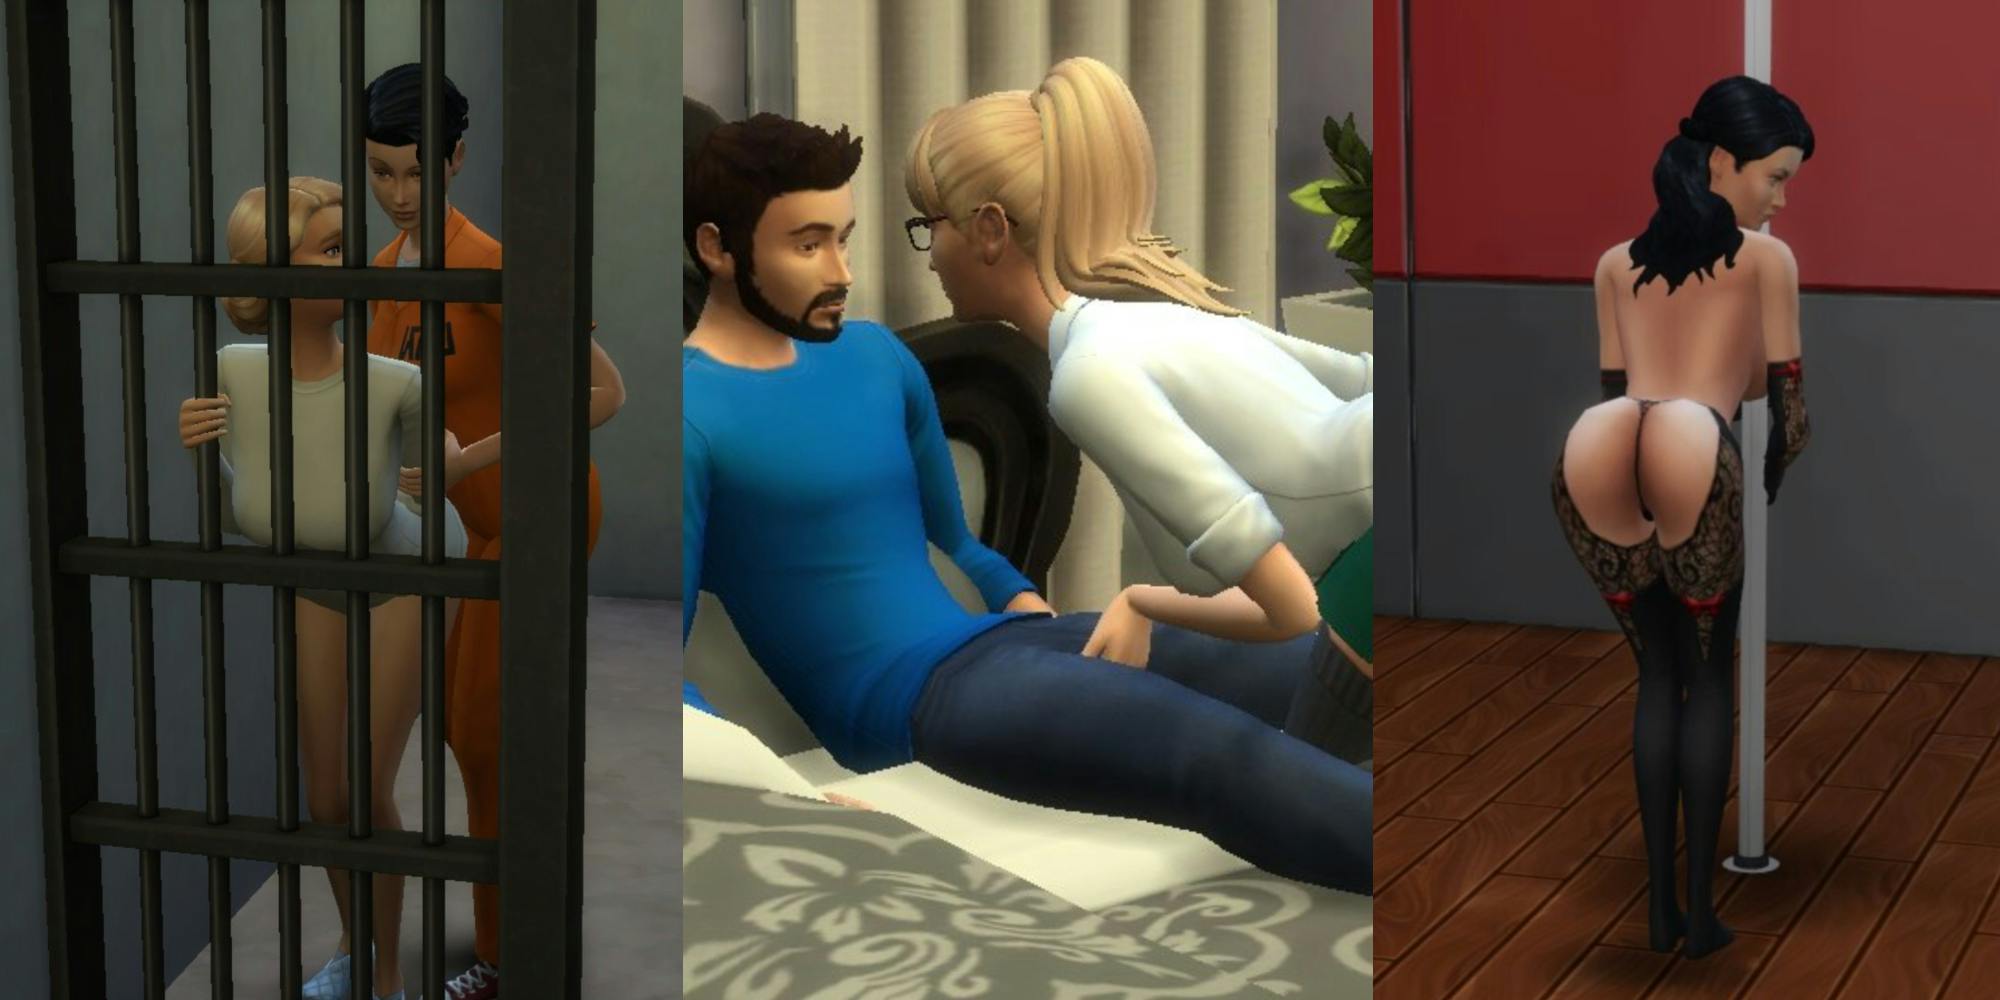 The Sims 4 Sex Mods: From Wicked Whims To Pregnancy Scares